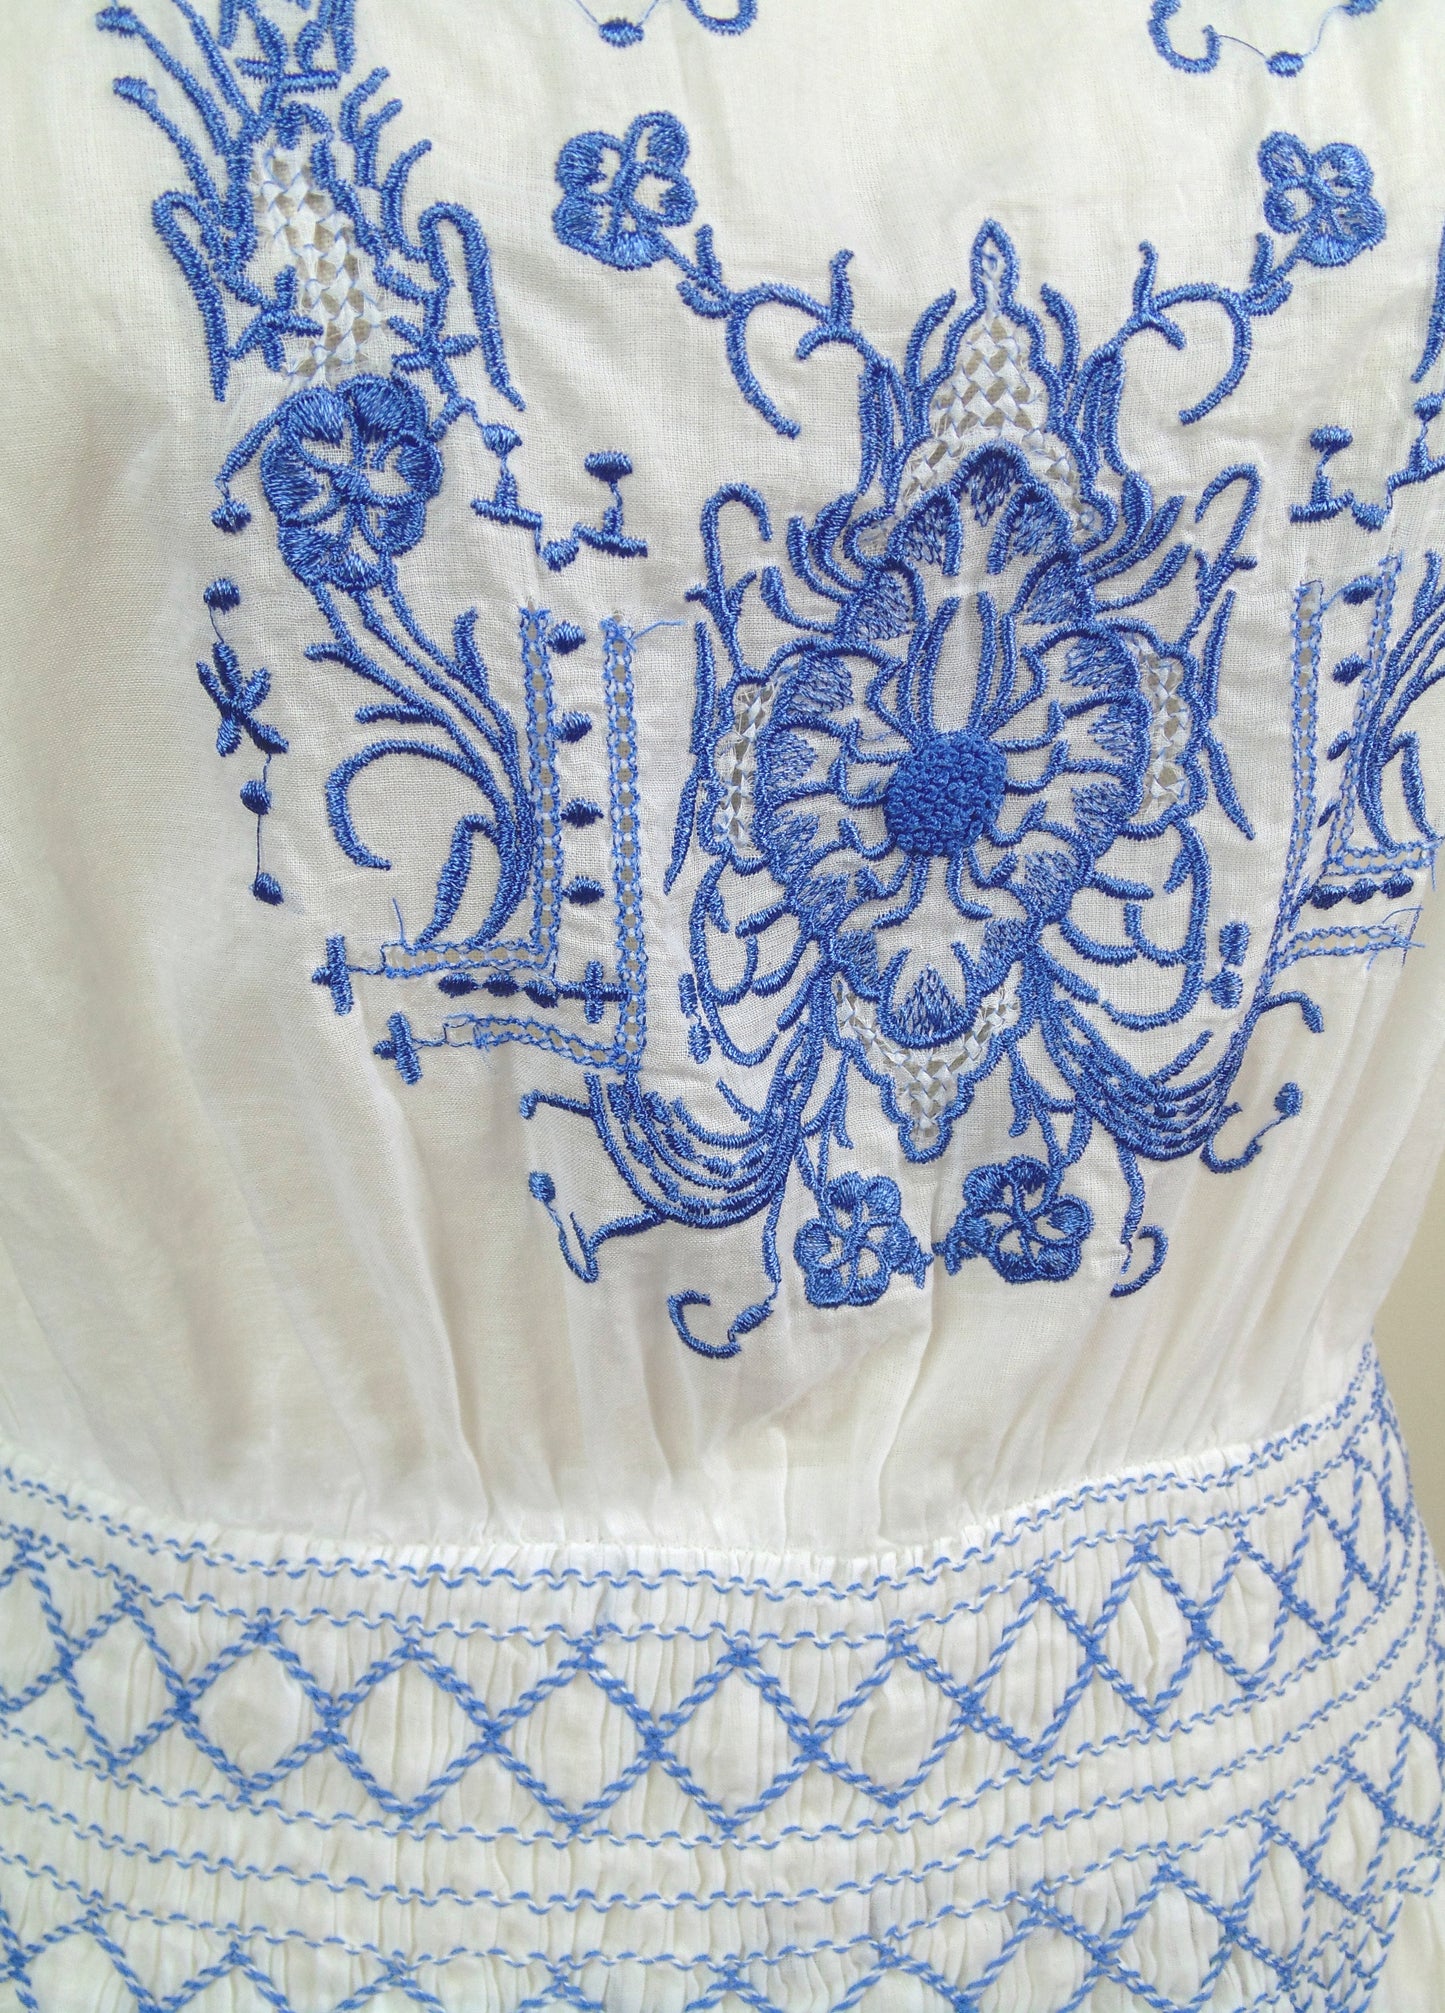 1920's Vintage Embroidered Cotton Voile Bungalow Dress - French Blue - J. Marin